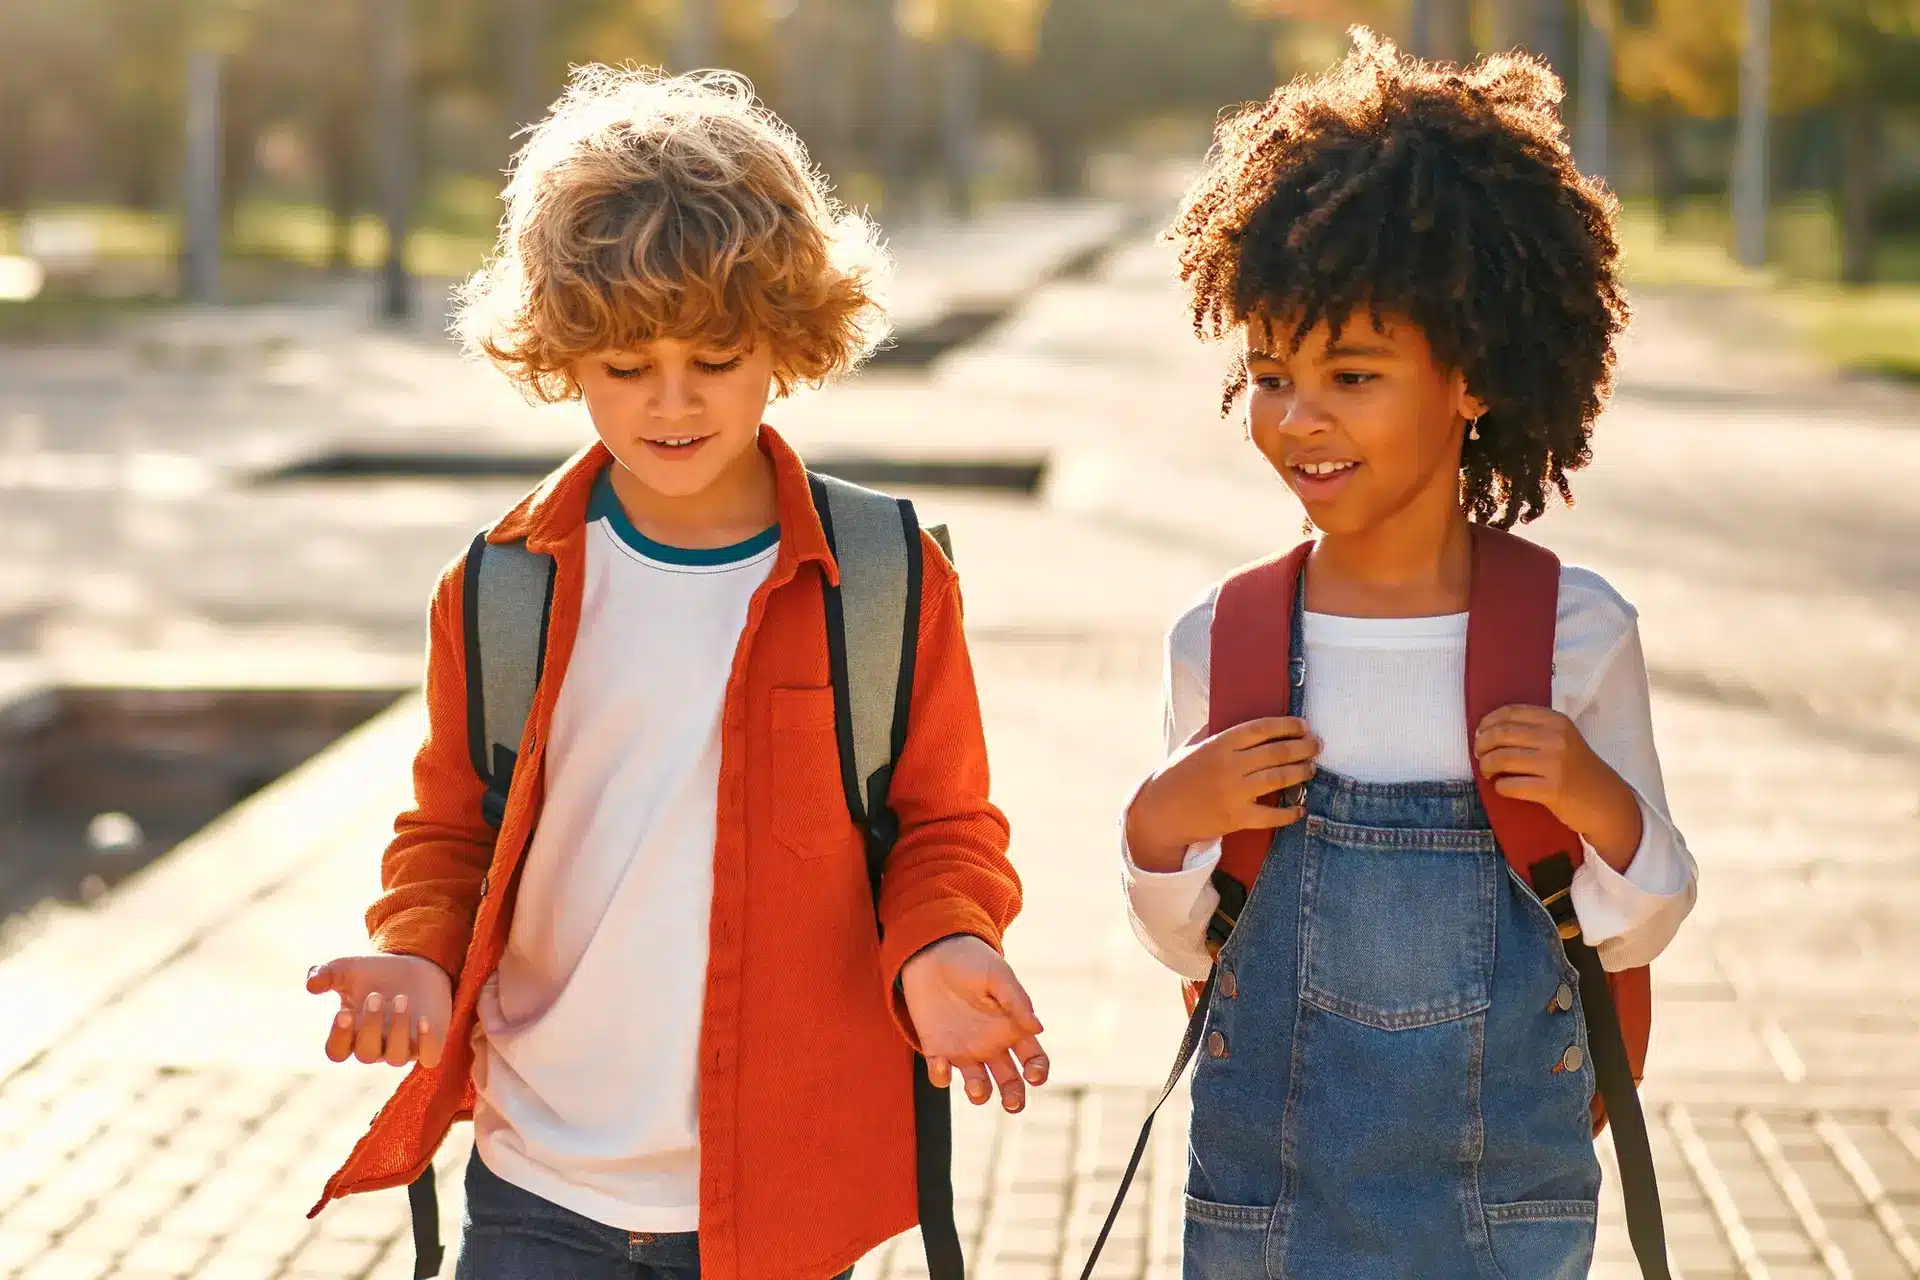 Two cheerful children walking with backpacks on a sunny day